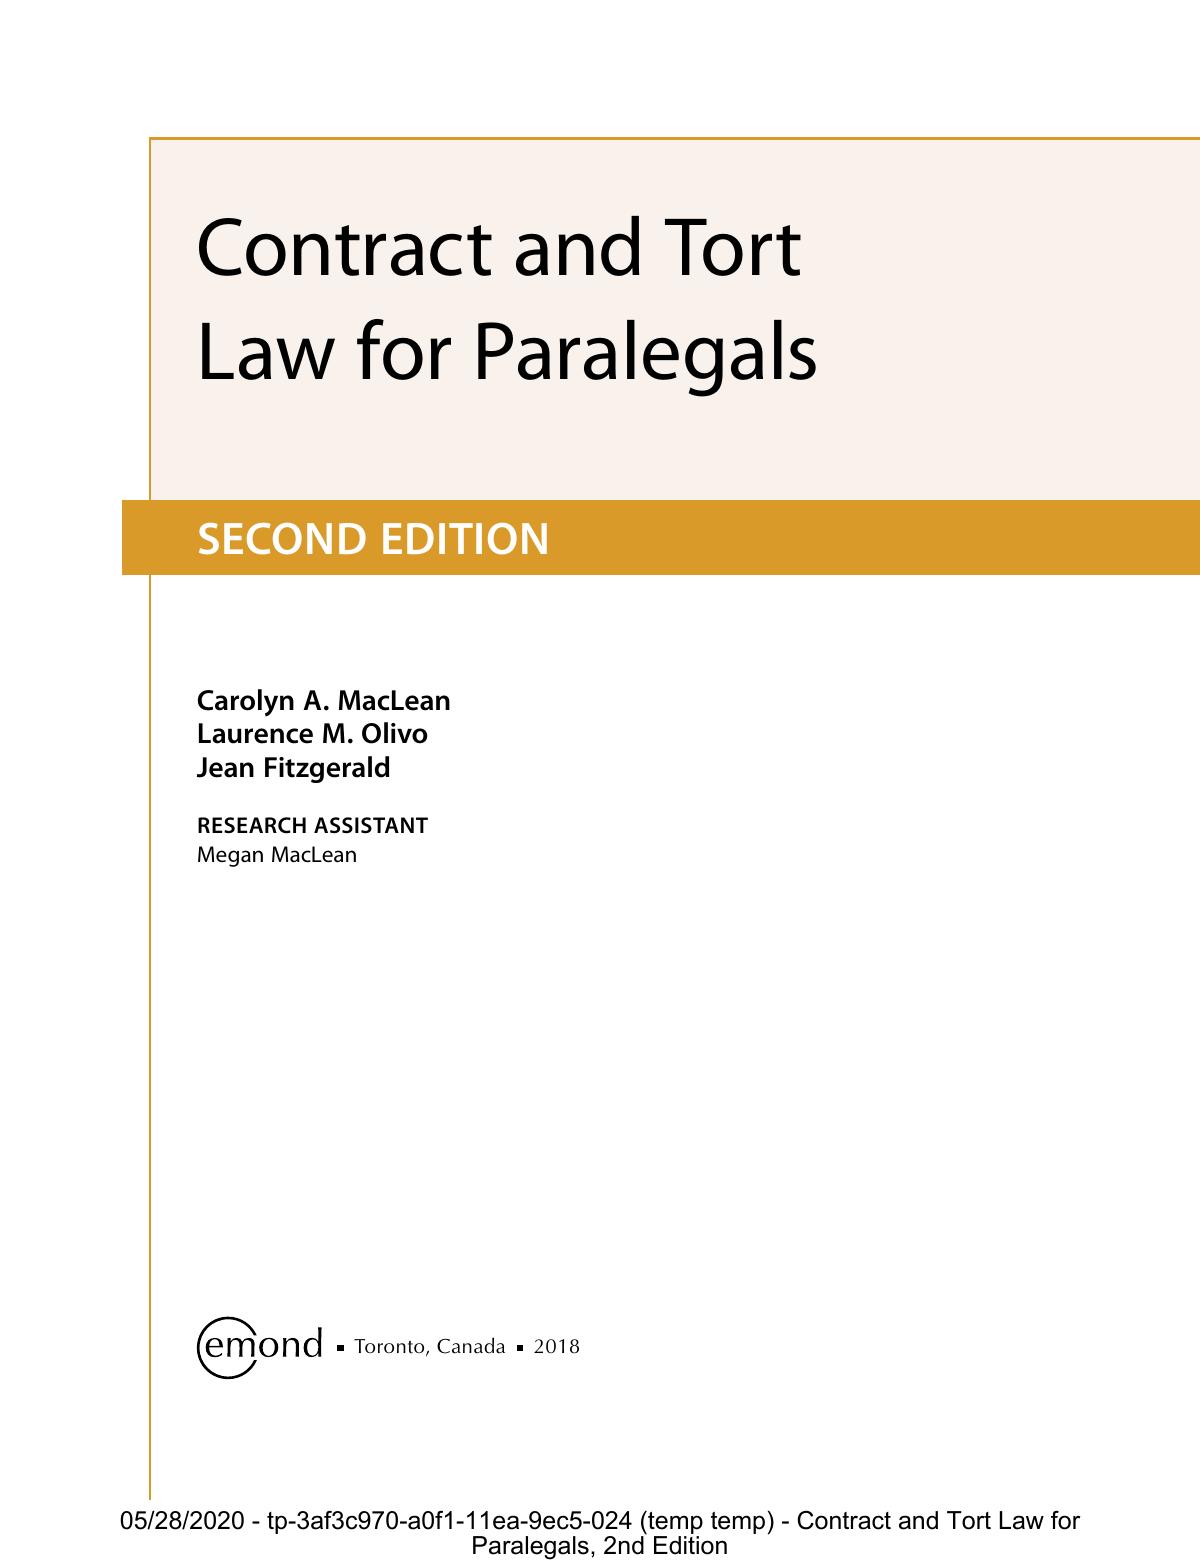 (eBook PDF)Contract and Tort Law for Paralegals, 2nd Edition by Jean Fitzgerald Carolyn MacLean, Nora Rock, Laurence M. Olivo